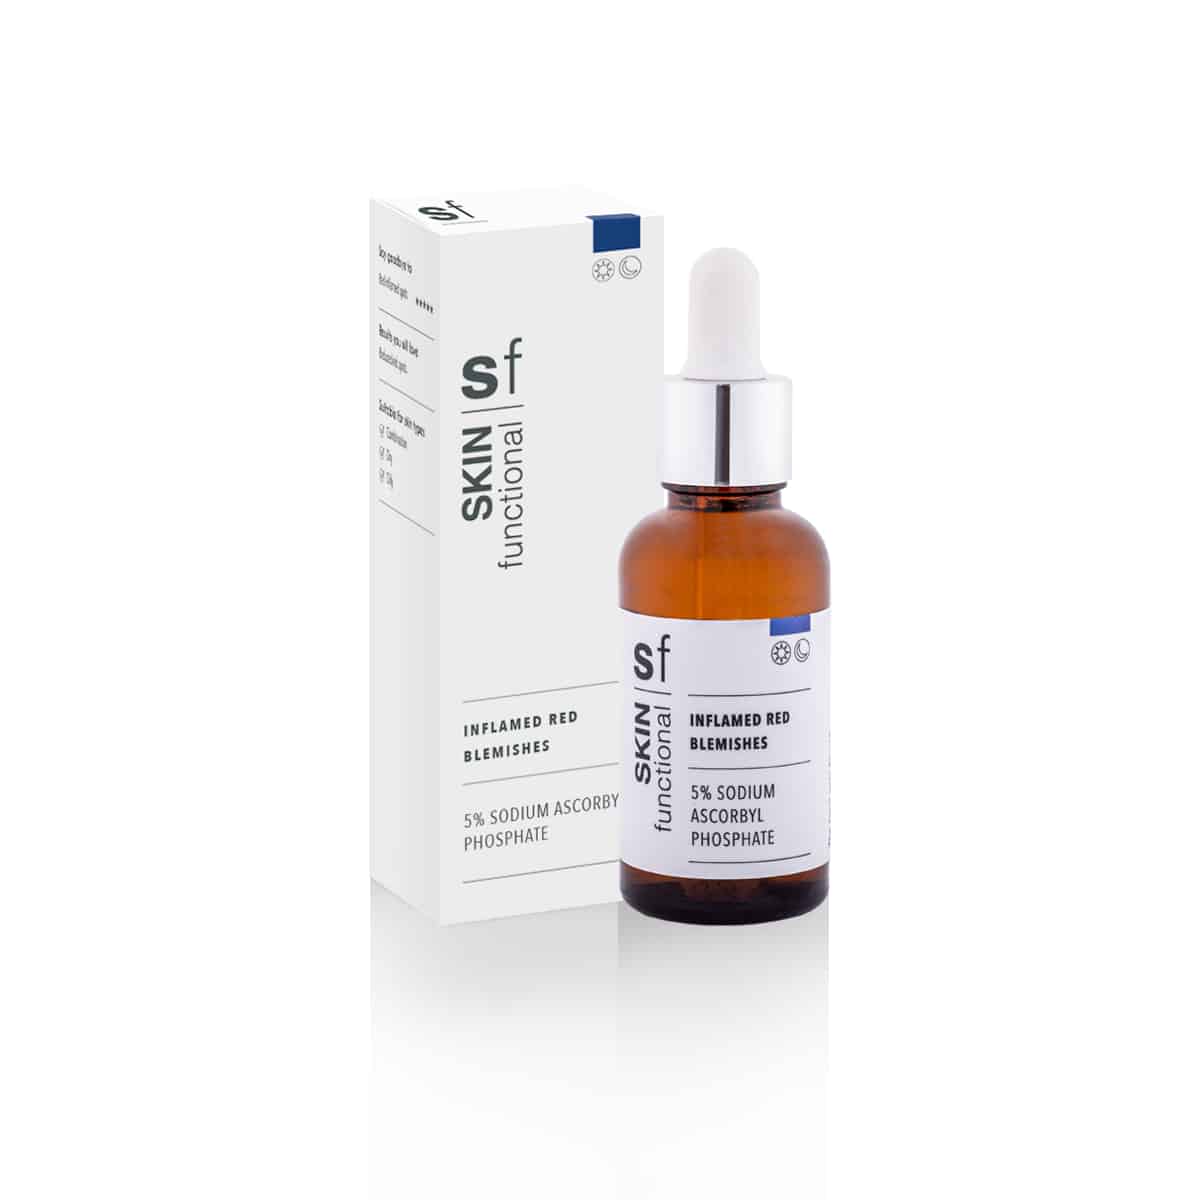 A bottle of vitamin C serum for SKIN Functional - 5% Sodium Ascorbyl Phosphate - Inflamed Red Blemishes on a white background.